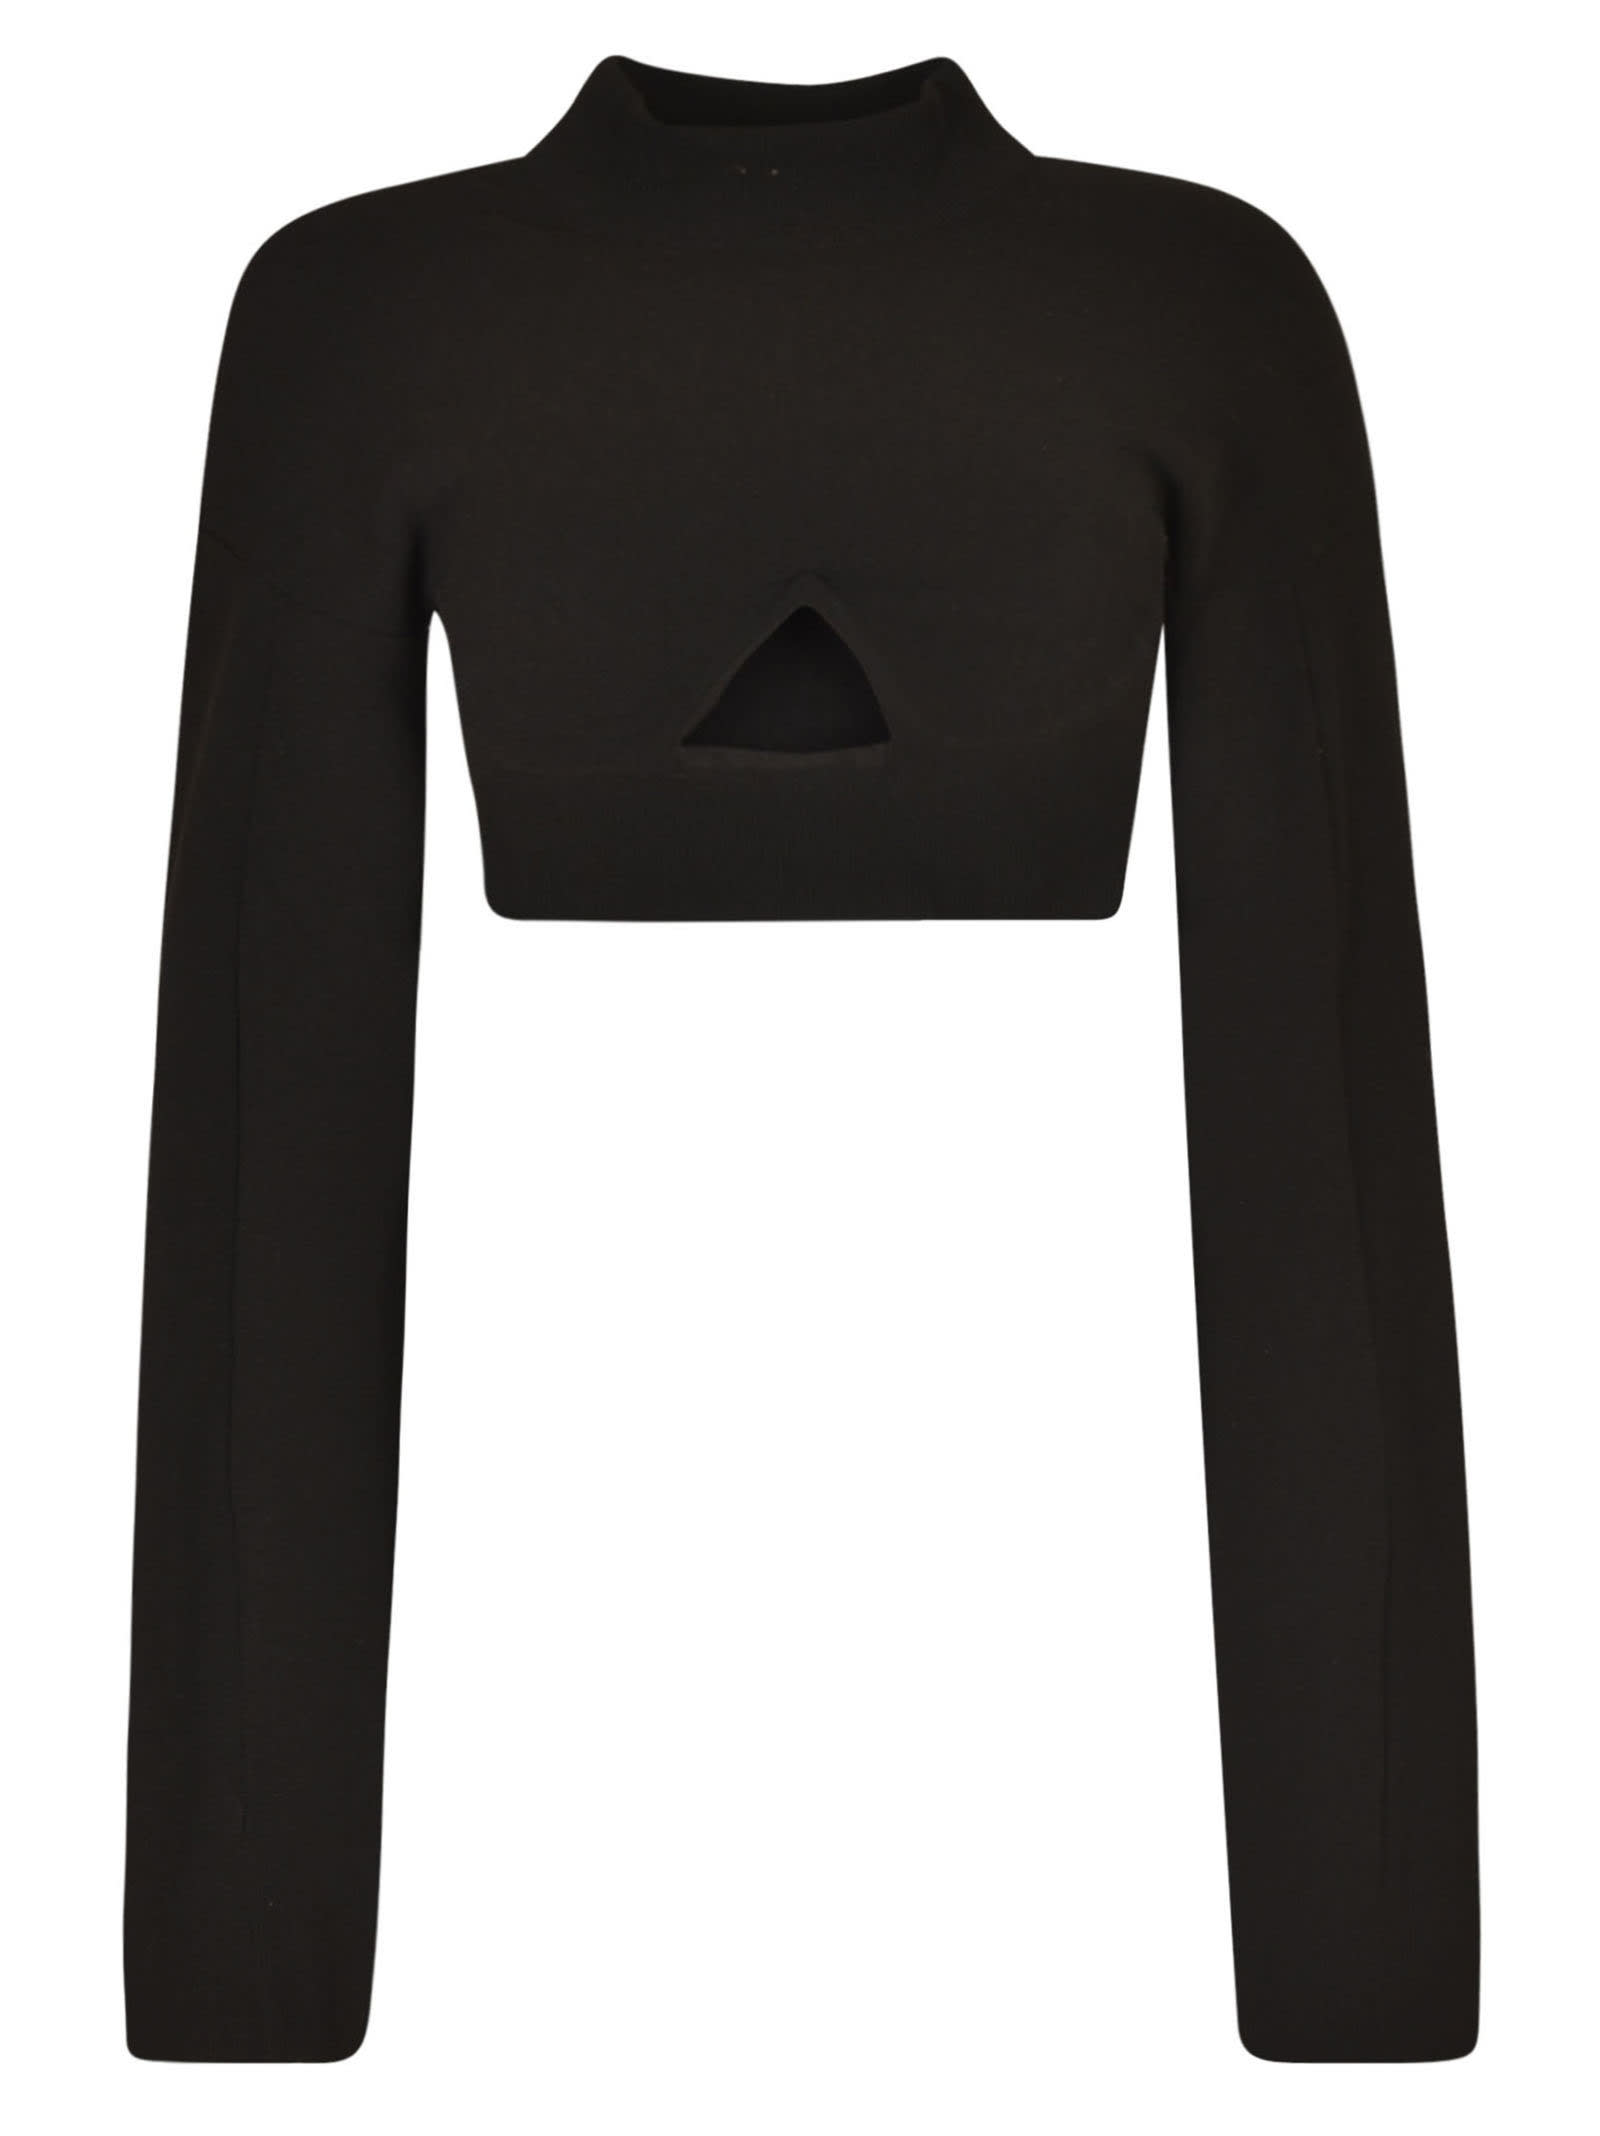 ALESSANDRO VIGILANTE CUT-OUT DETAIL CROPPED SWEATER